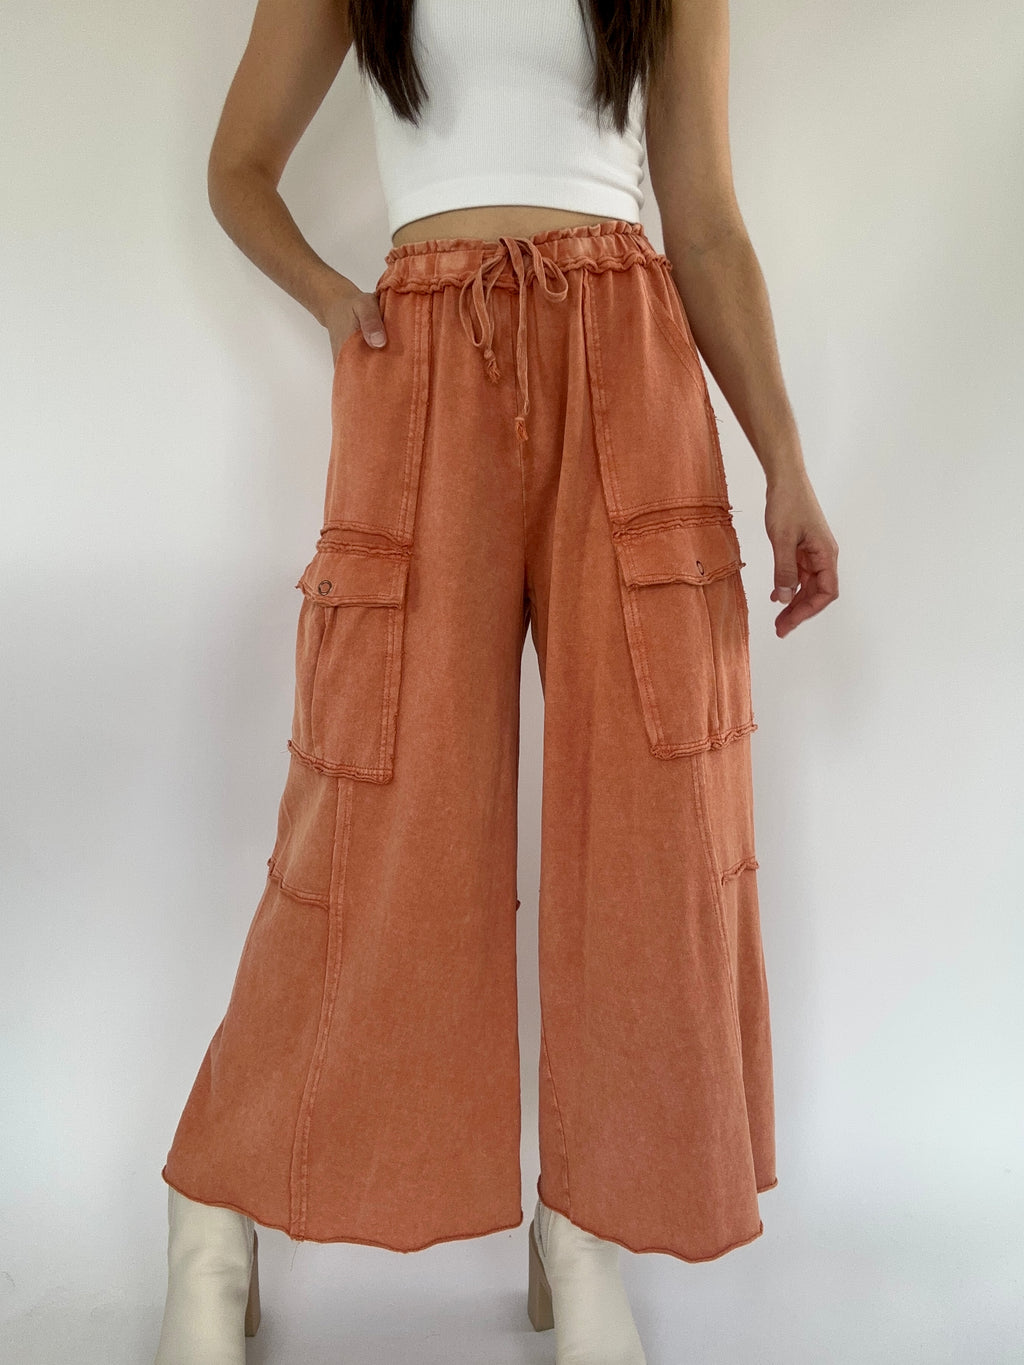 Middle Of The Road Pants - Rust